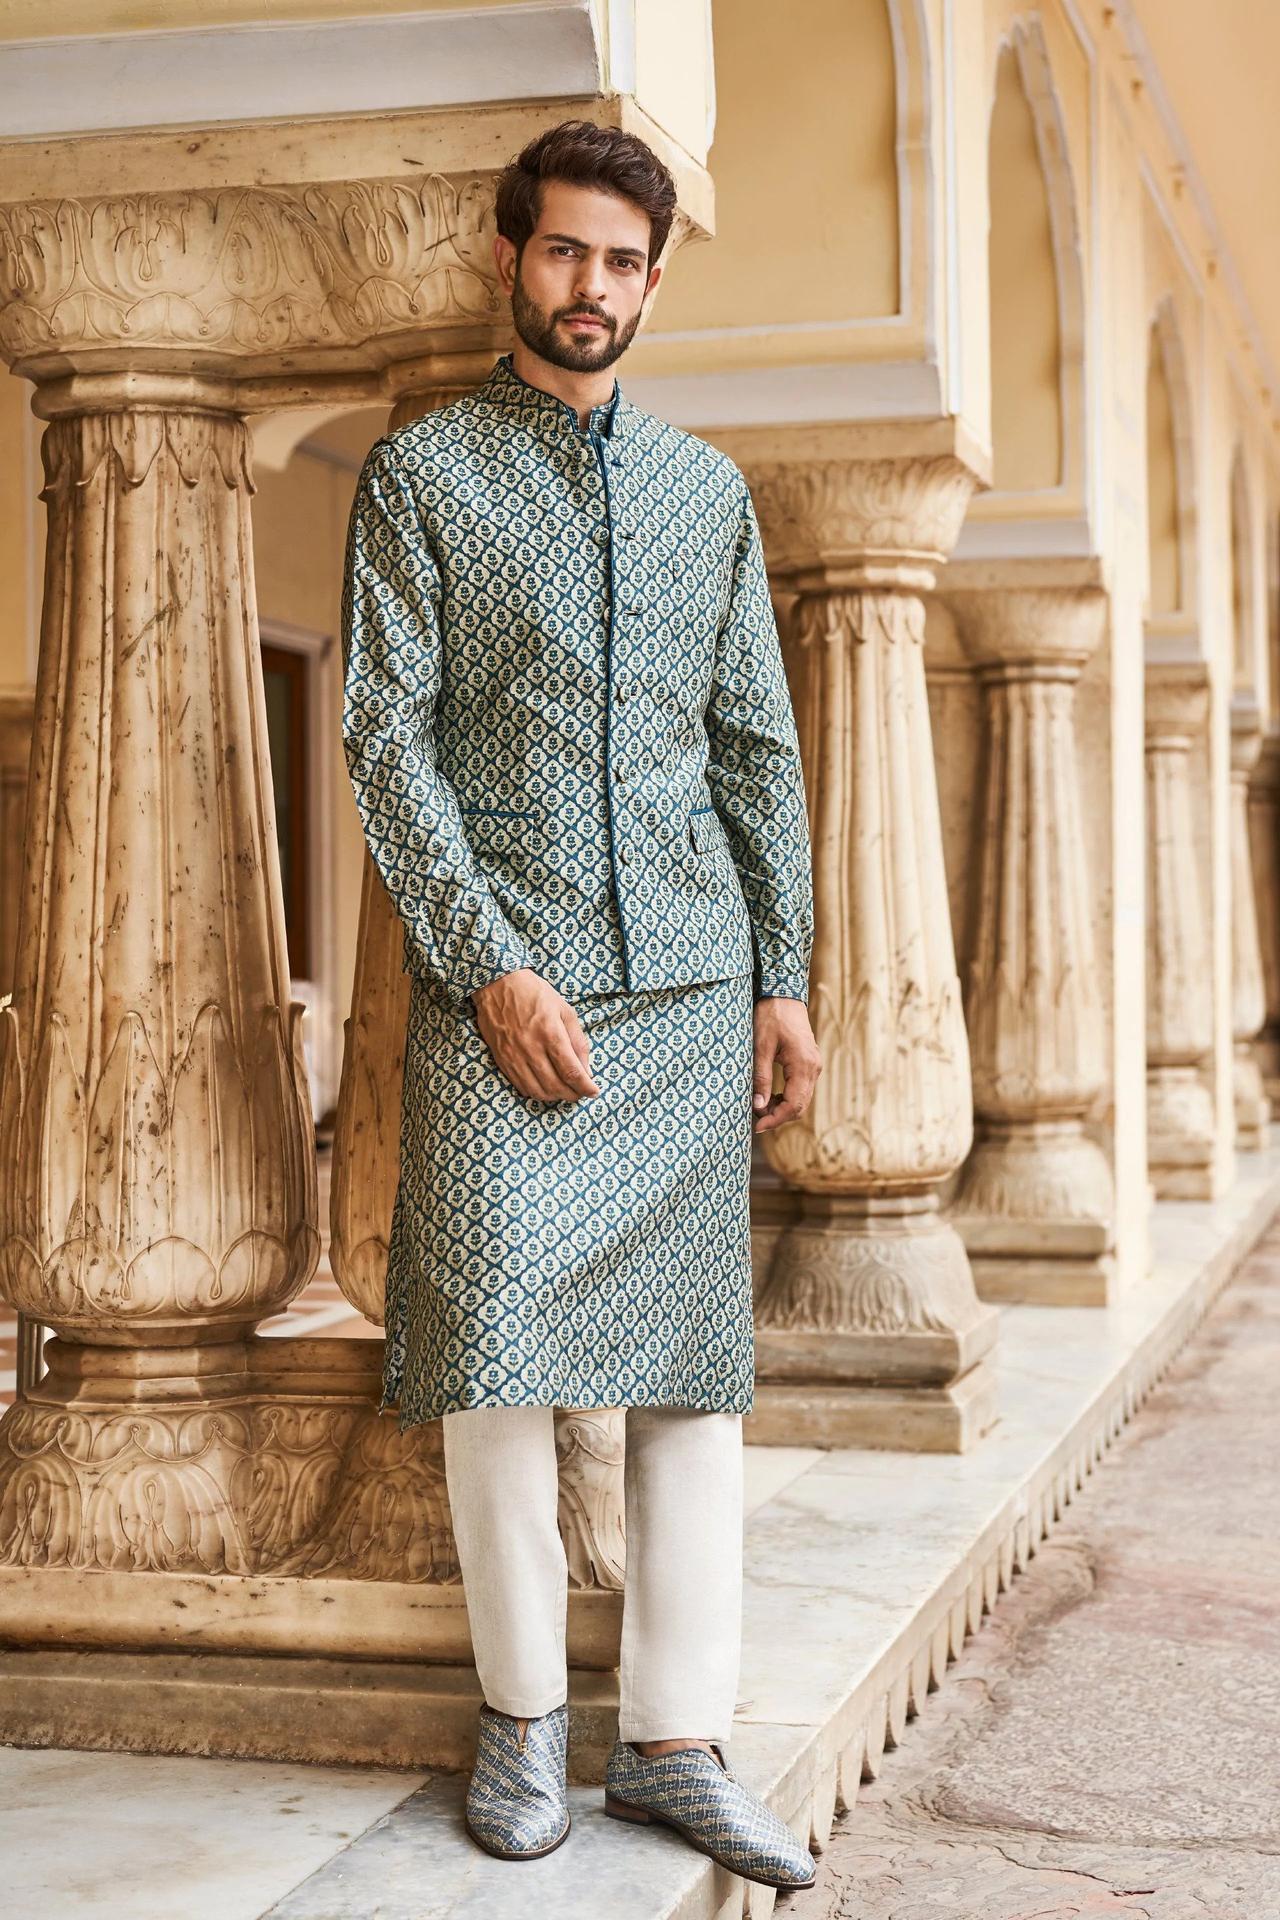 12 Sherwani Shoes That Every Indian Groom Should Own!